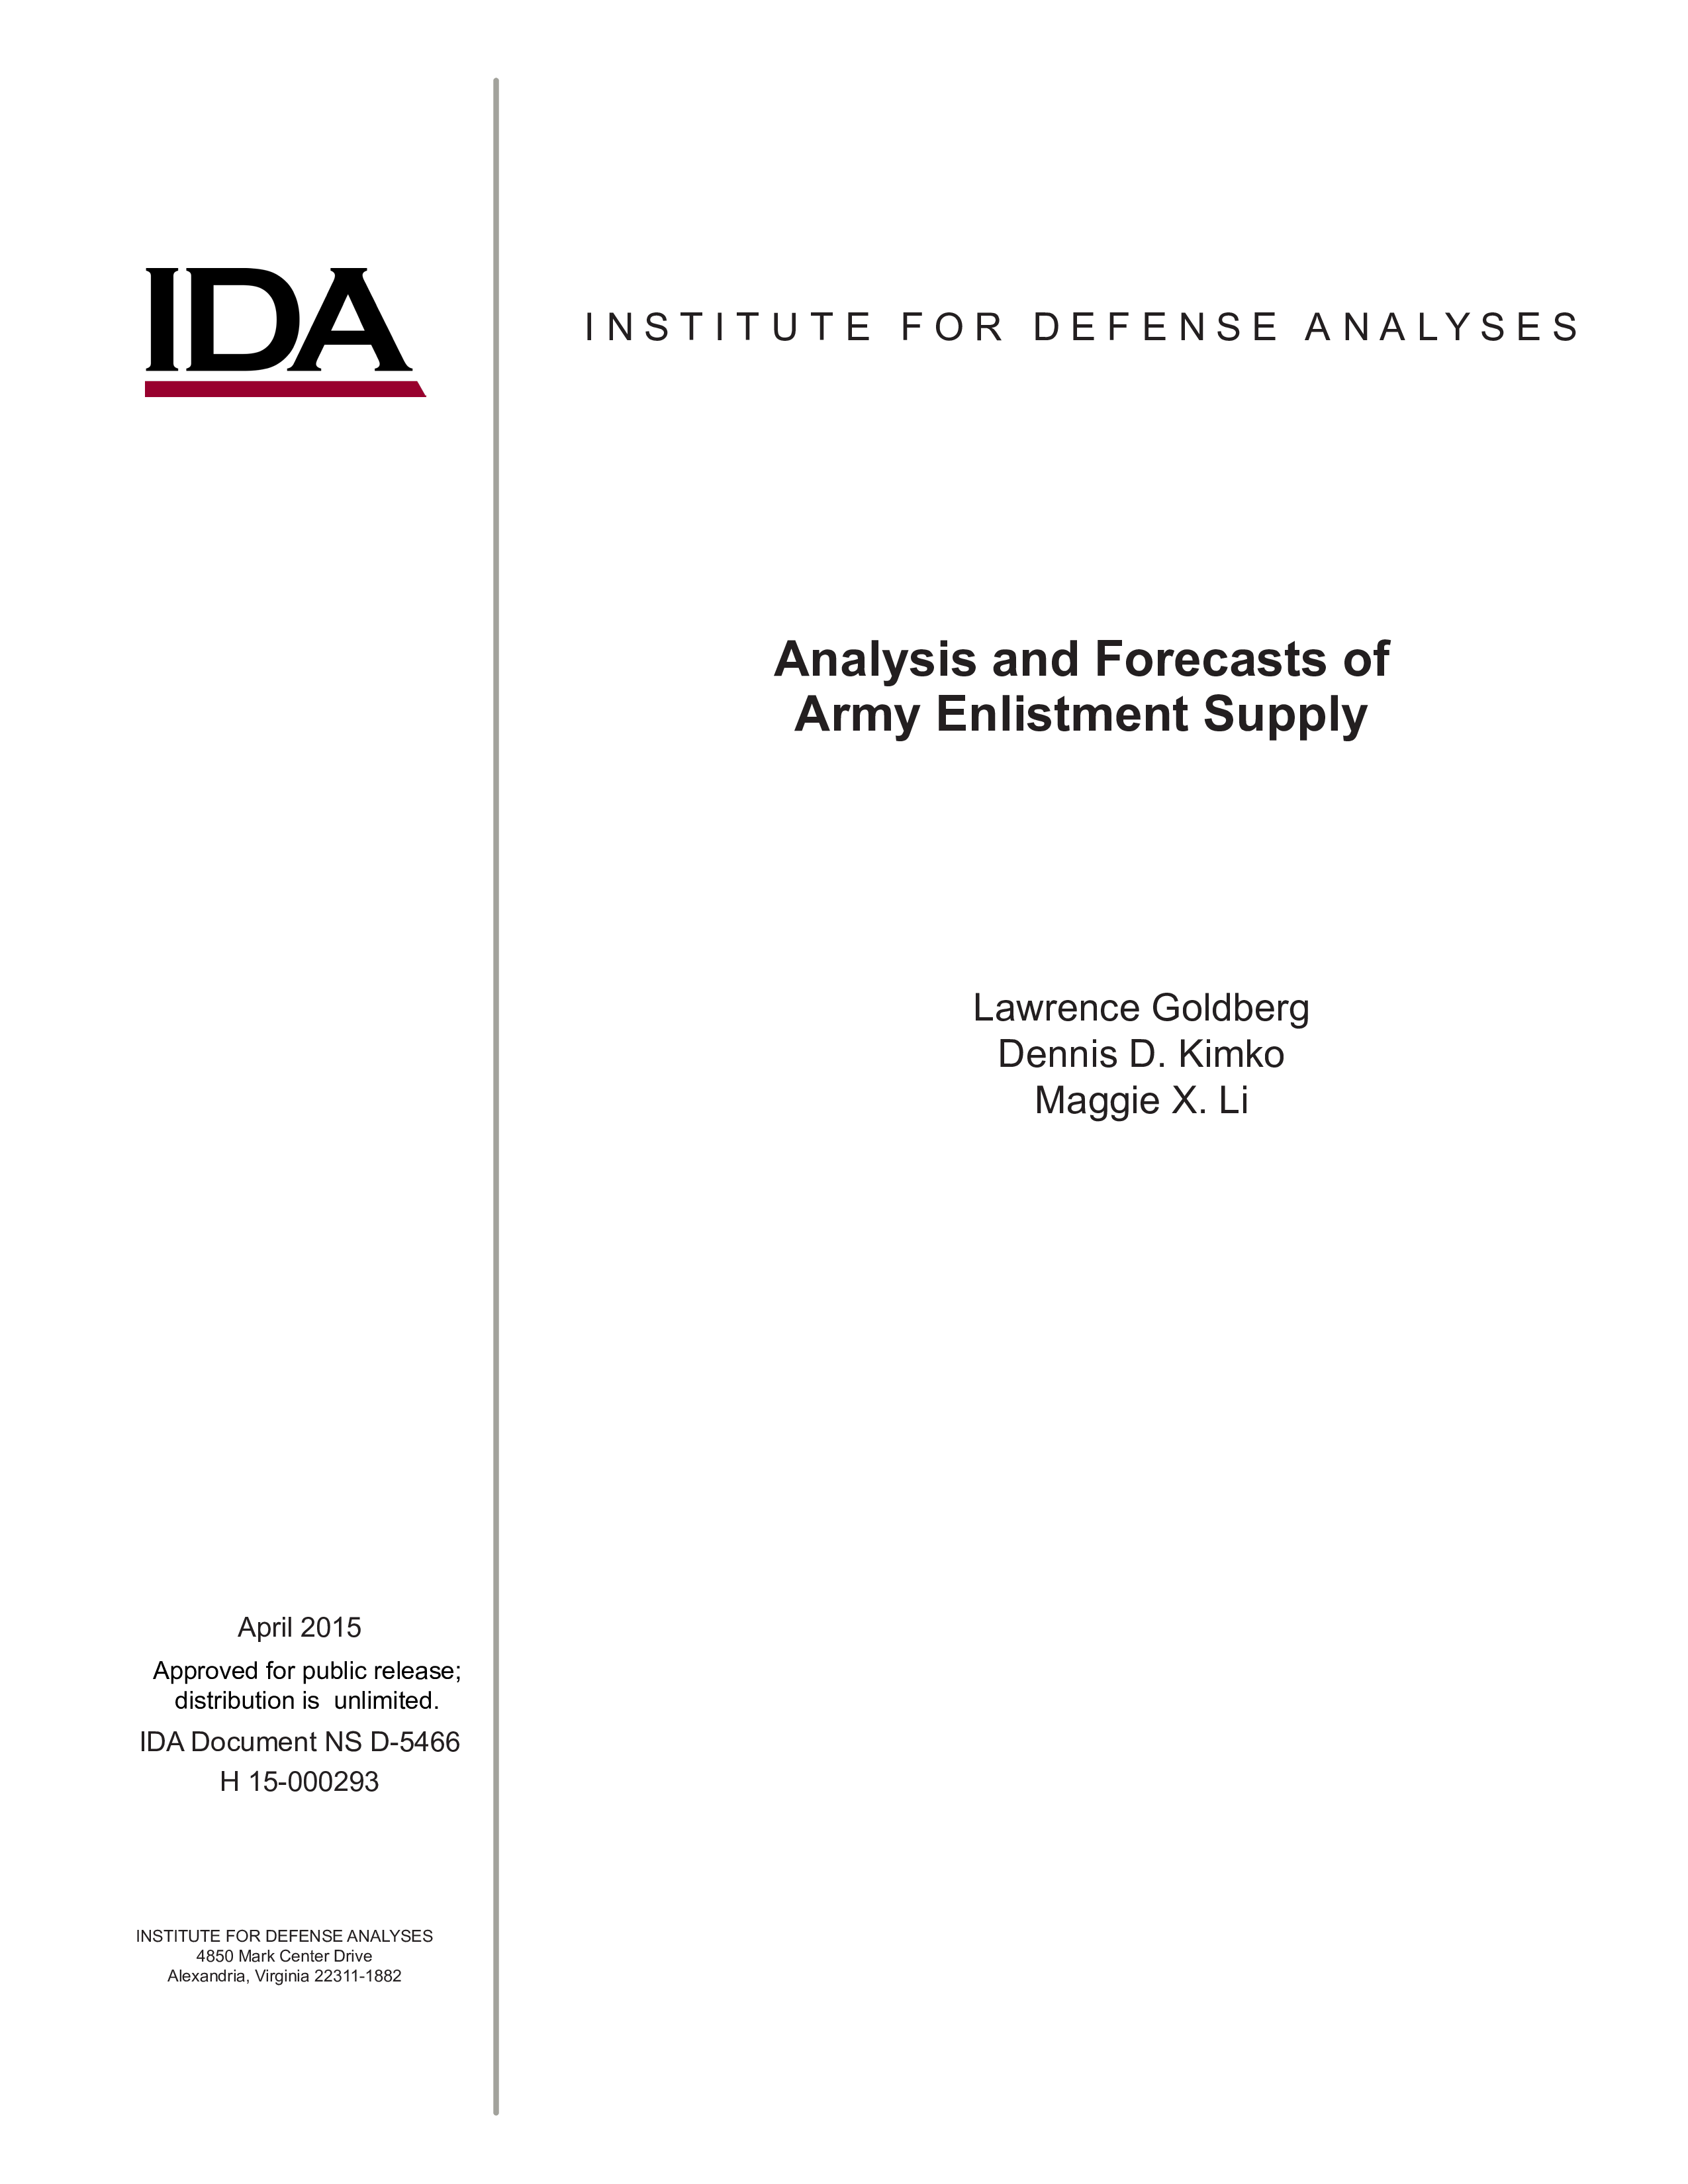 Analysis and Forecasts of Army Enlistment Supply